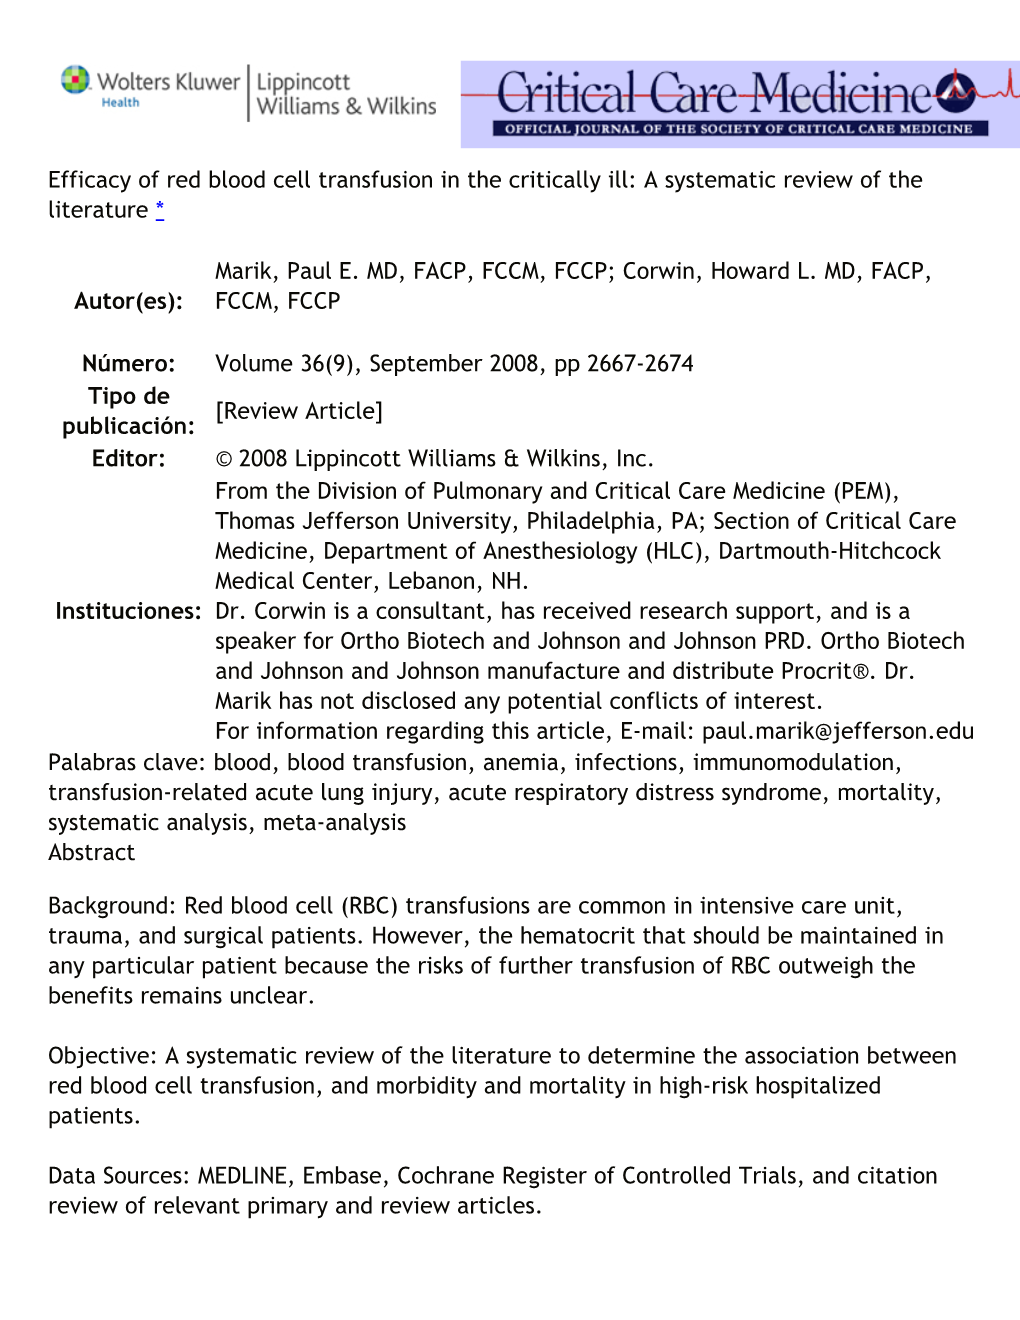 Efficacy of Red Blood Cell Transfusion in the Critically Ill: a Systematic Review of The